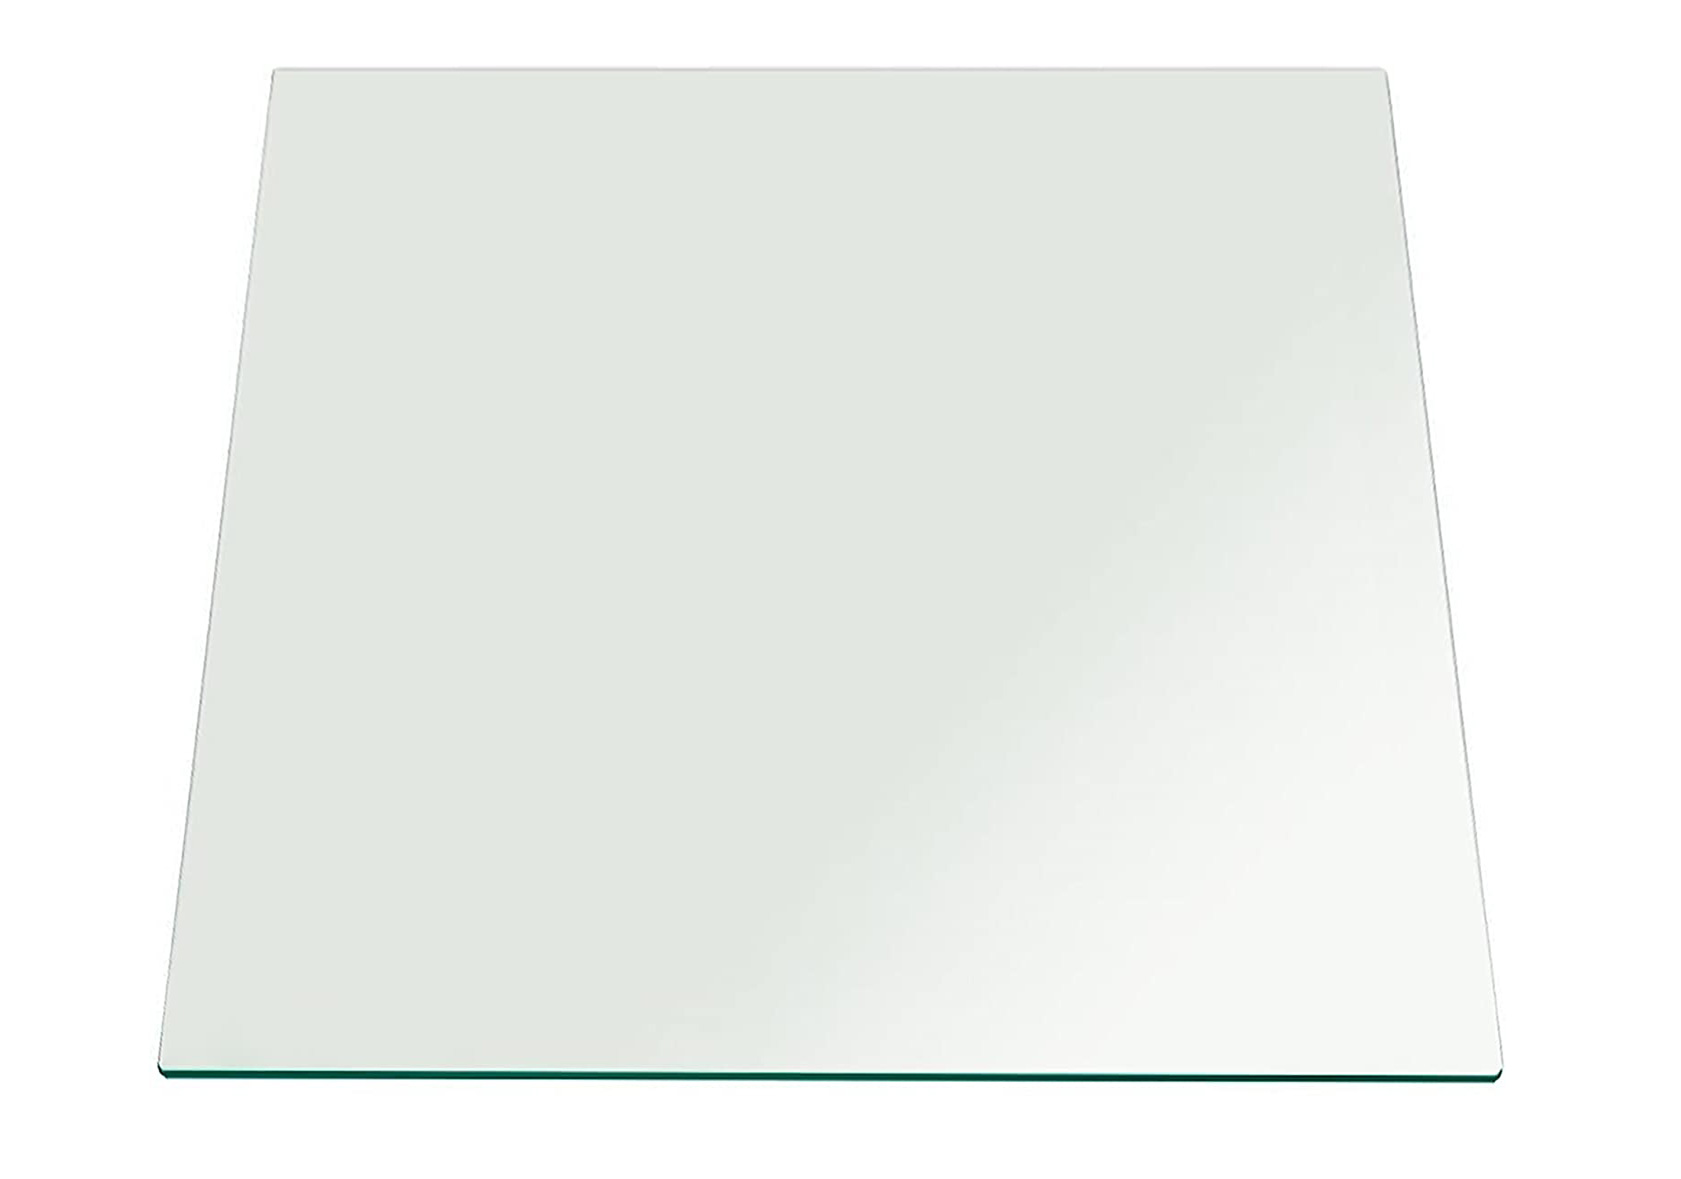 Buy 4x4 Feet Square Clear Glass for Table Top - 8mm, 10mm, 12mm thickness